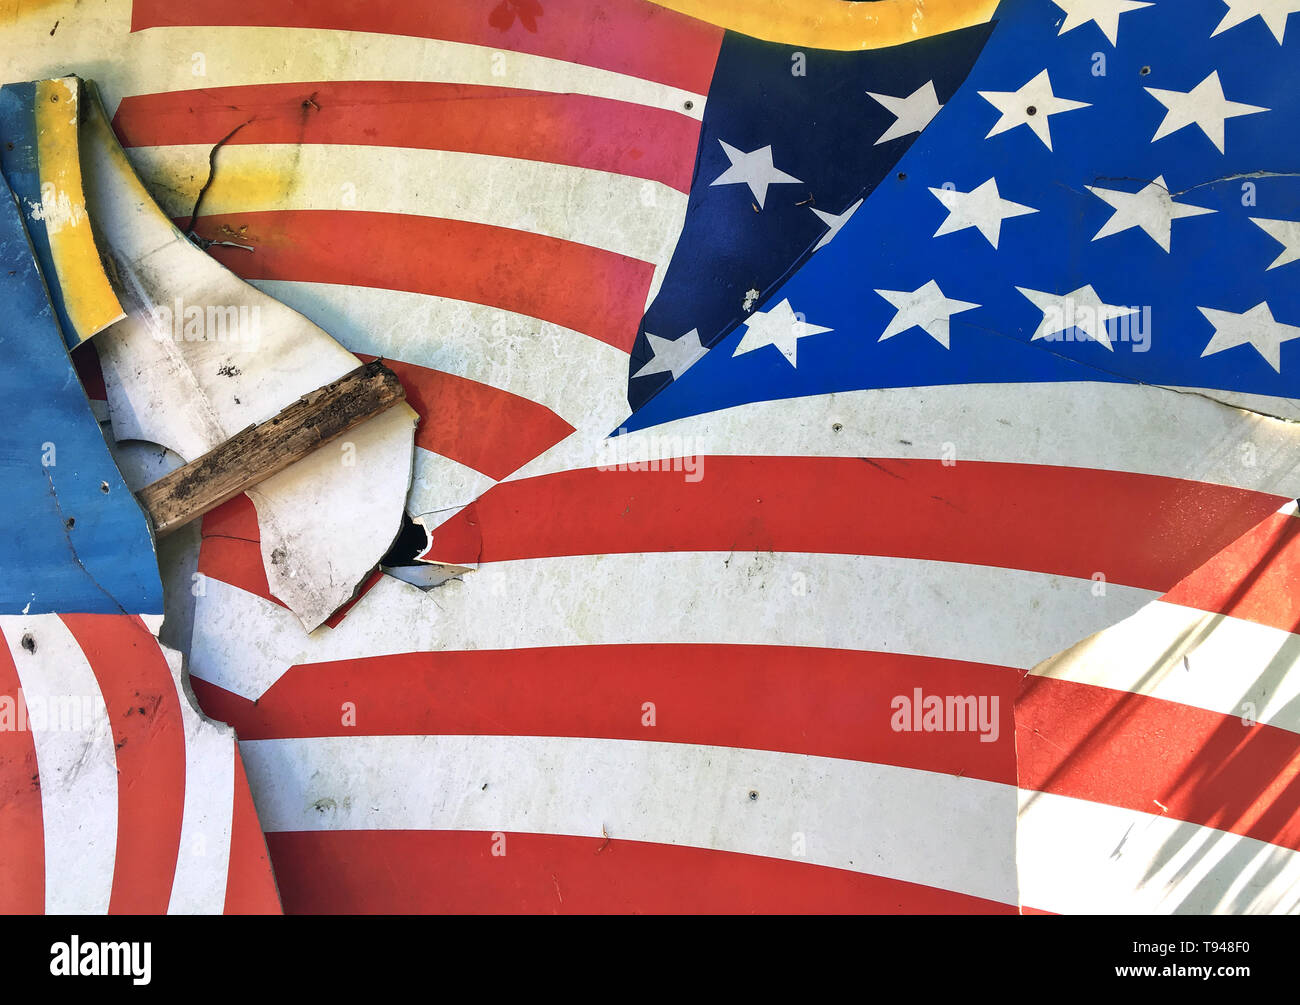 Broken flag, demolished background cardboard with American flag "Stars and Stripes" as motive, disposed at the roadside. Stock Photo